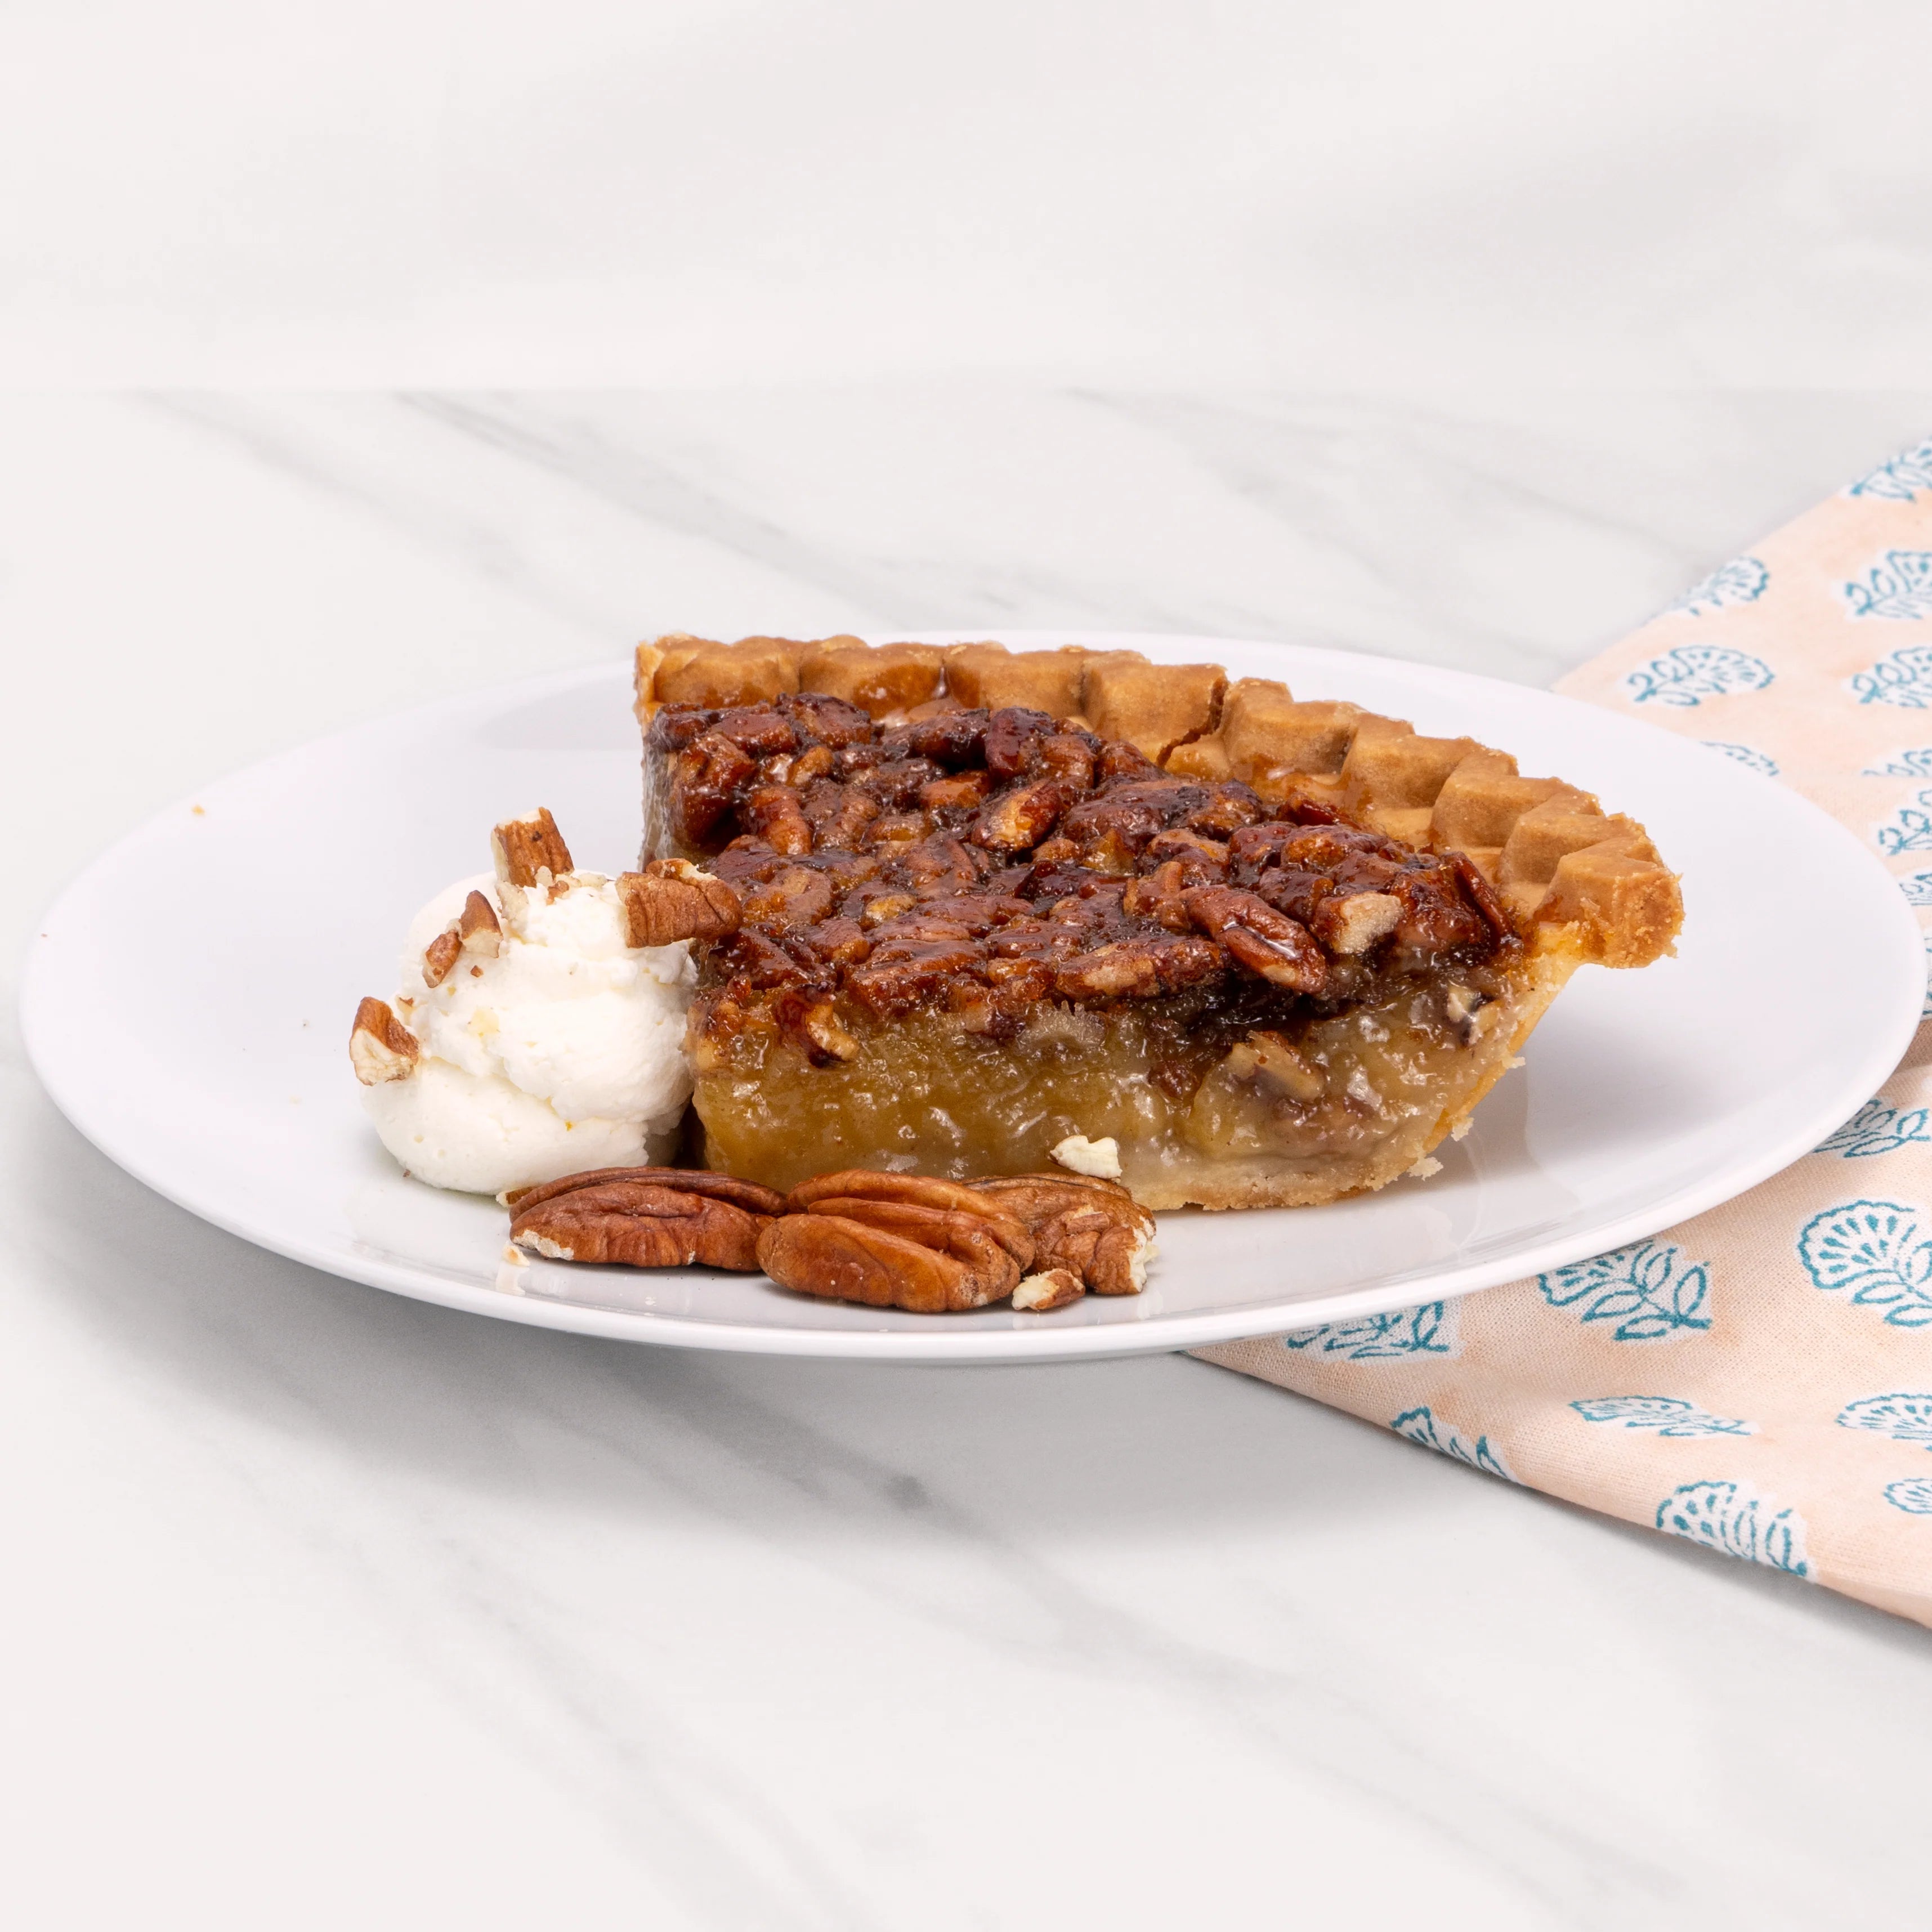 Slice of Gluten Free Pecan Pie garnished with pecans and crème.